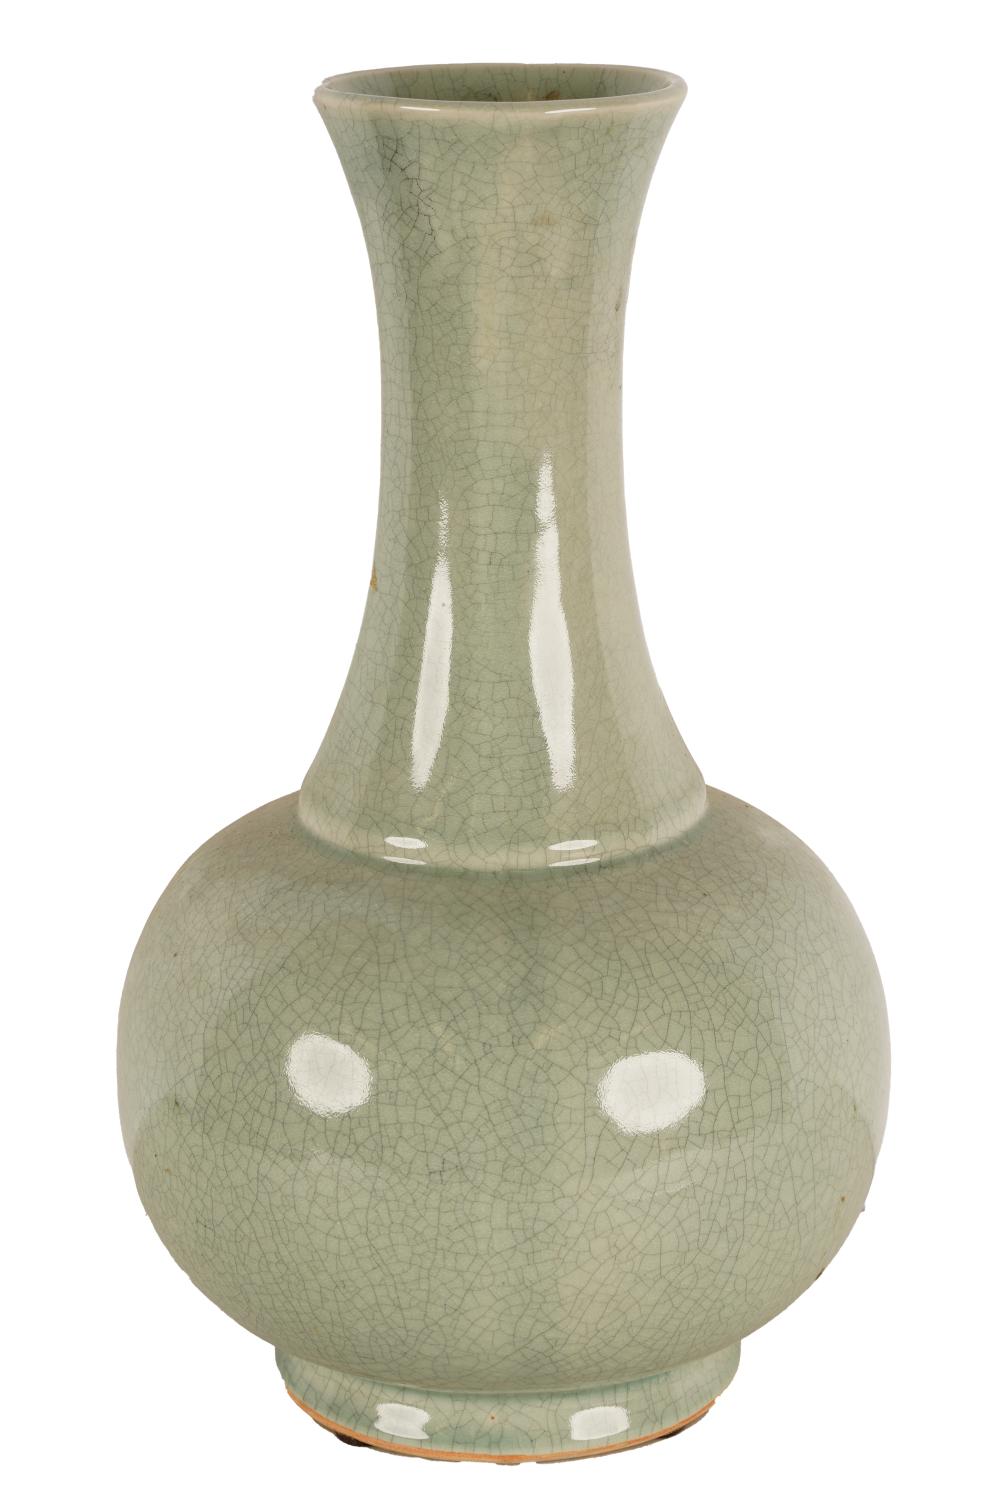 CHINESE CELADON VASEunsigned 16 3330d4